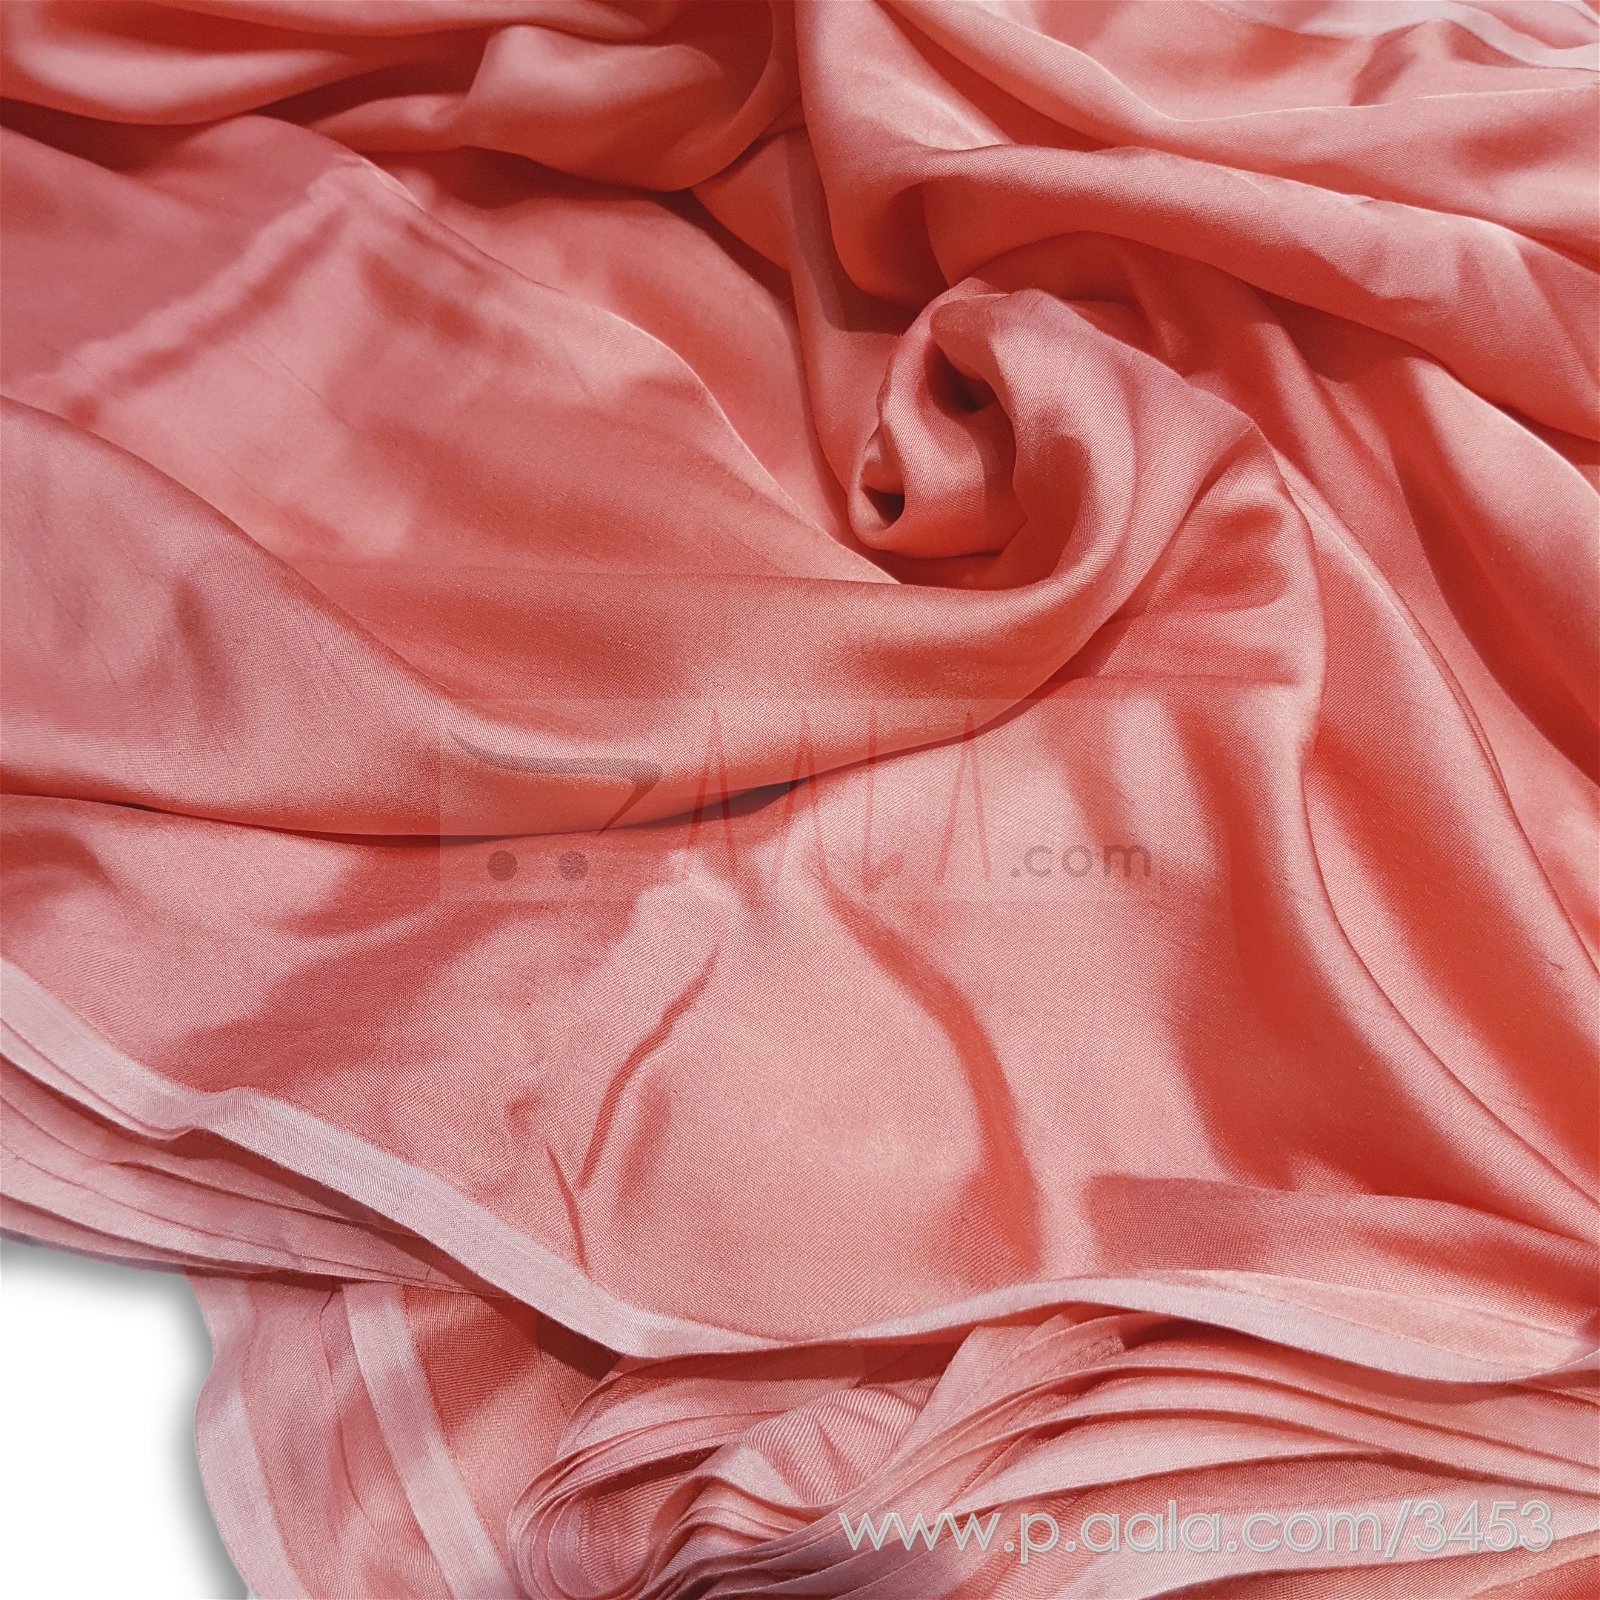 Modal Satin Viscose 44 Inches Dyed Per Metre #3453